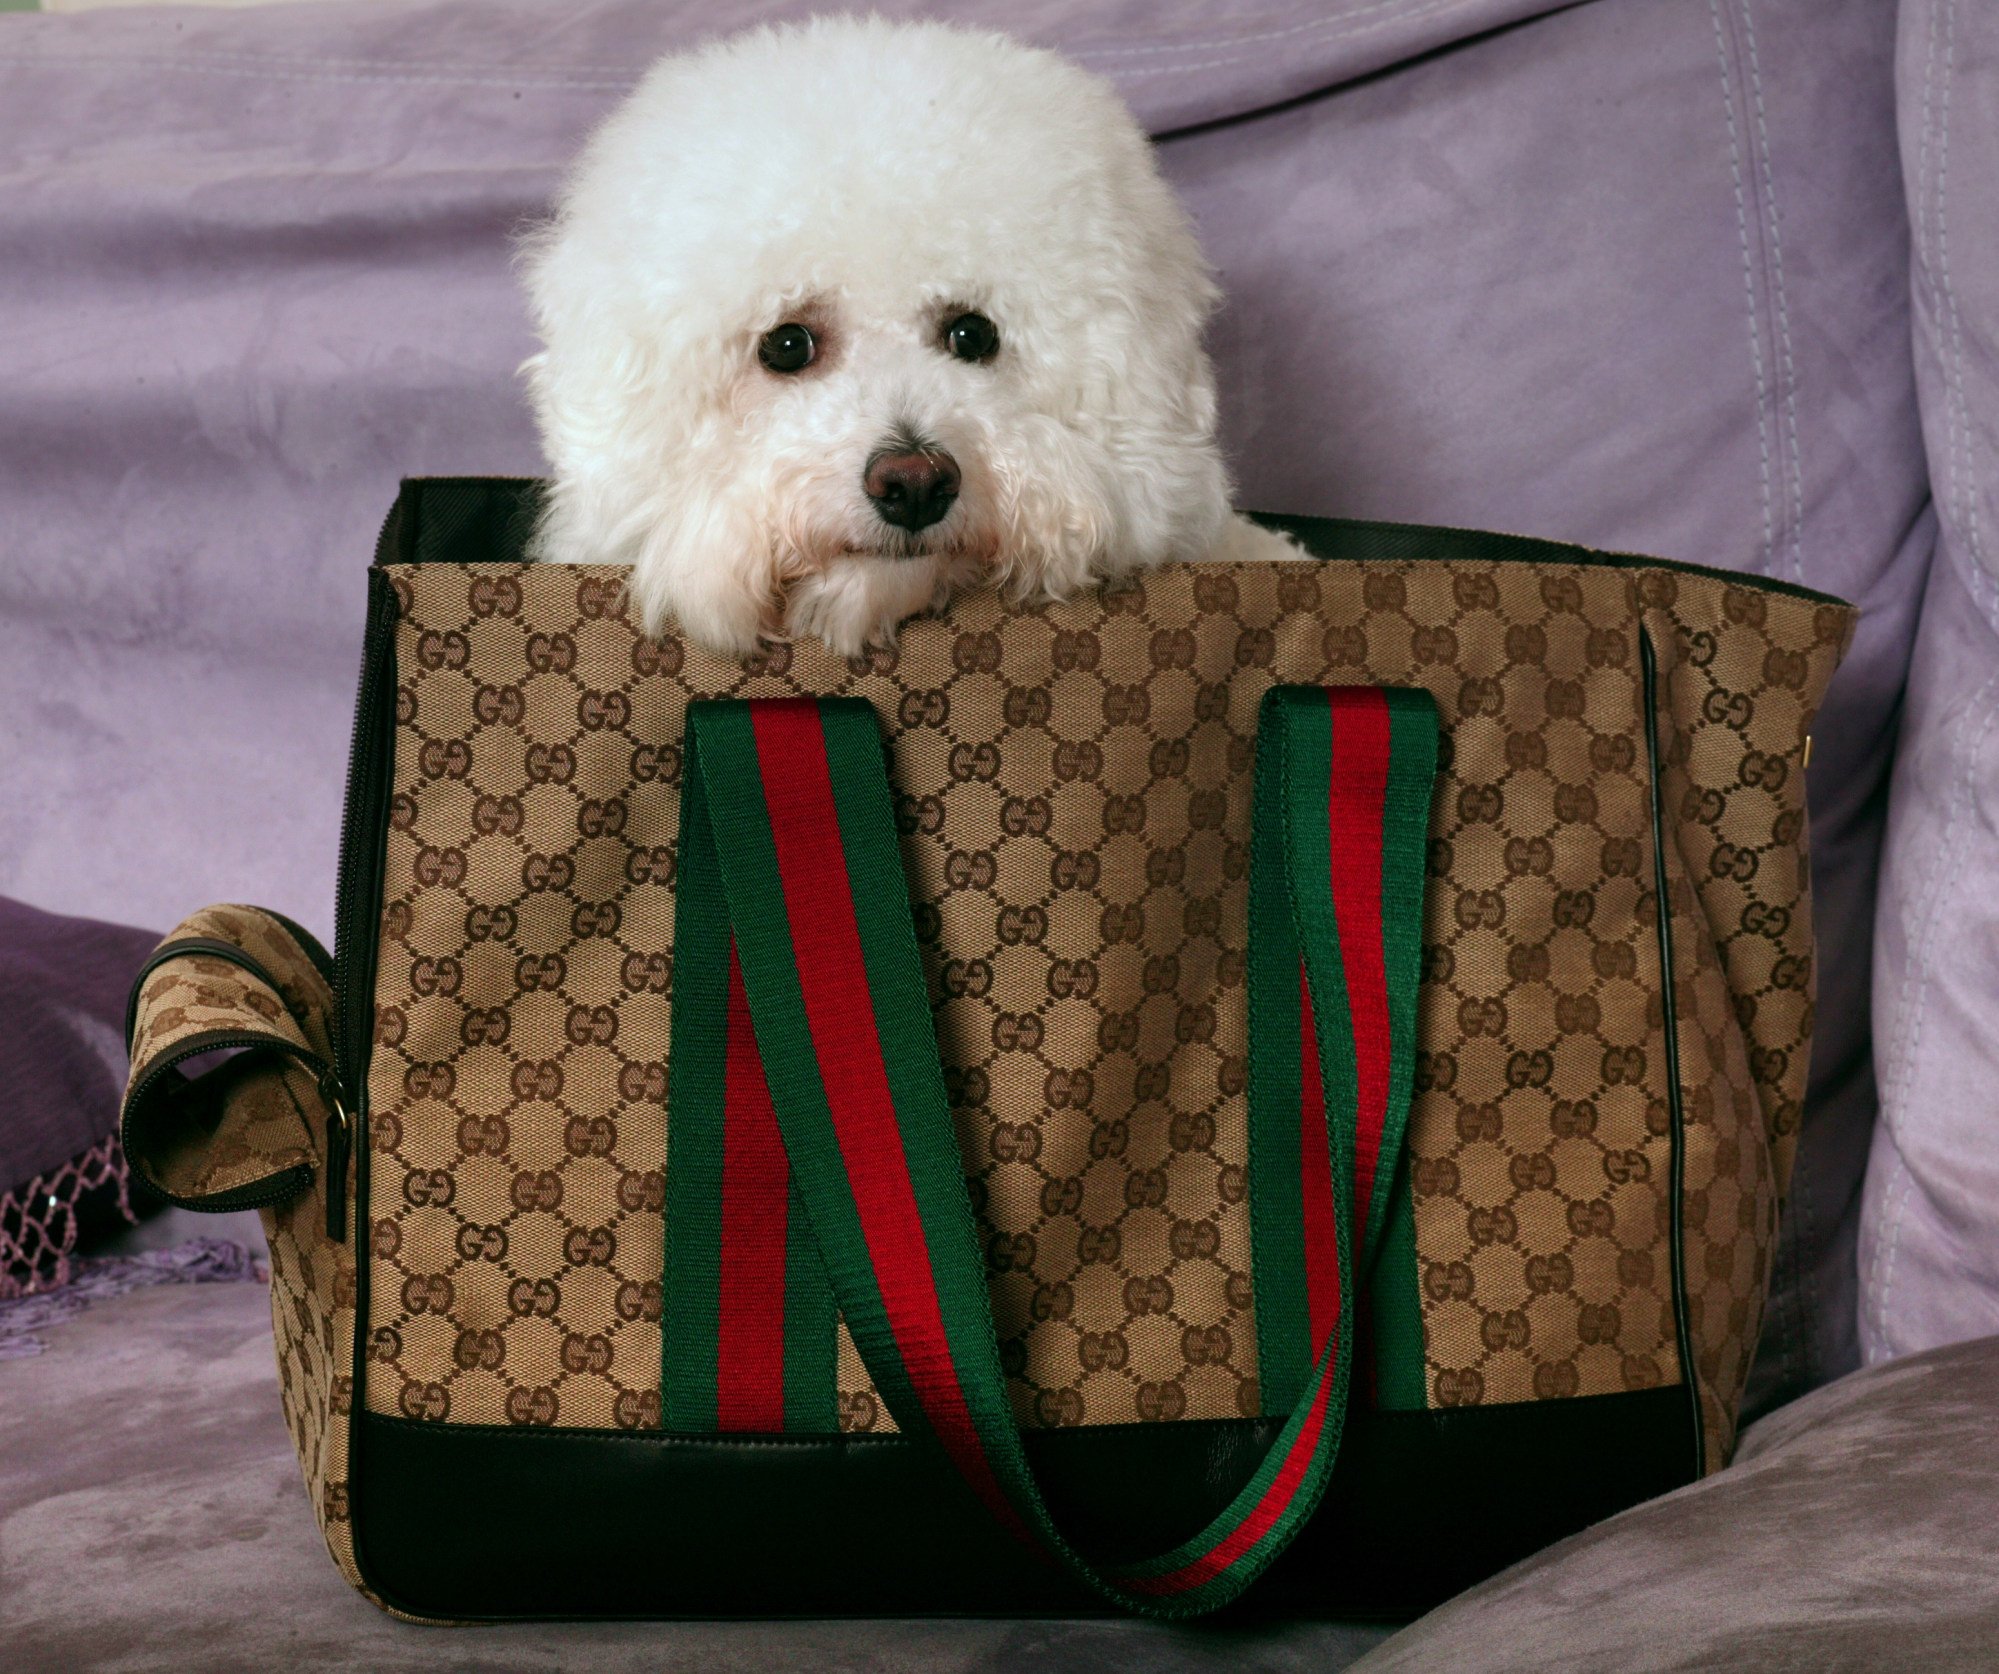 4 luxury brands to twin with your pampered pooch: from Louis Vuitton's chic  dog leash and Gucci's monogrammed pet carrier bags to Prada's posh collar  and Christian Louboutin's stylish harnesses